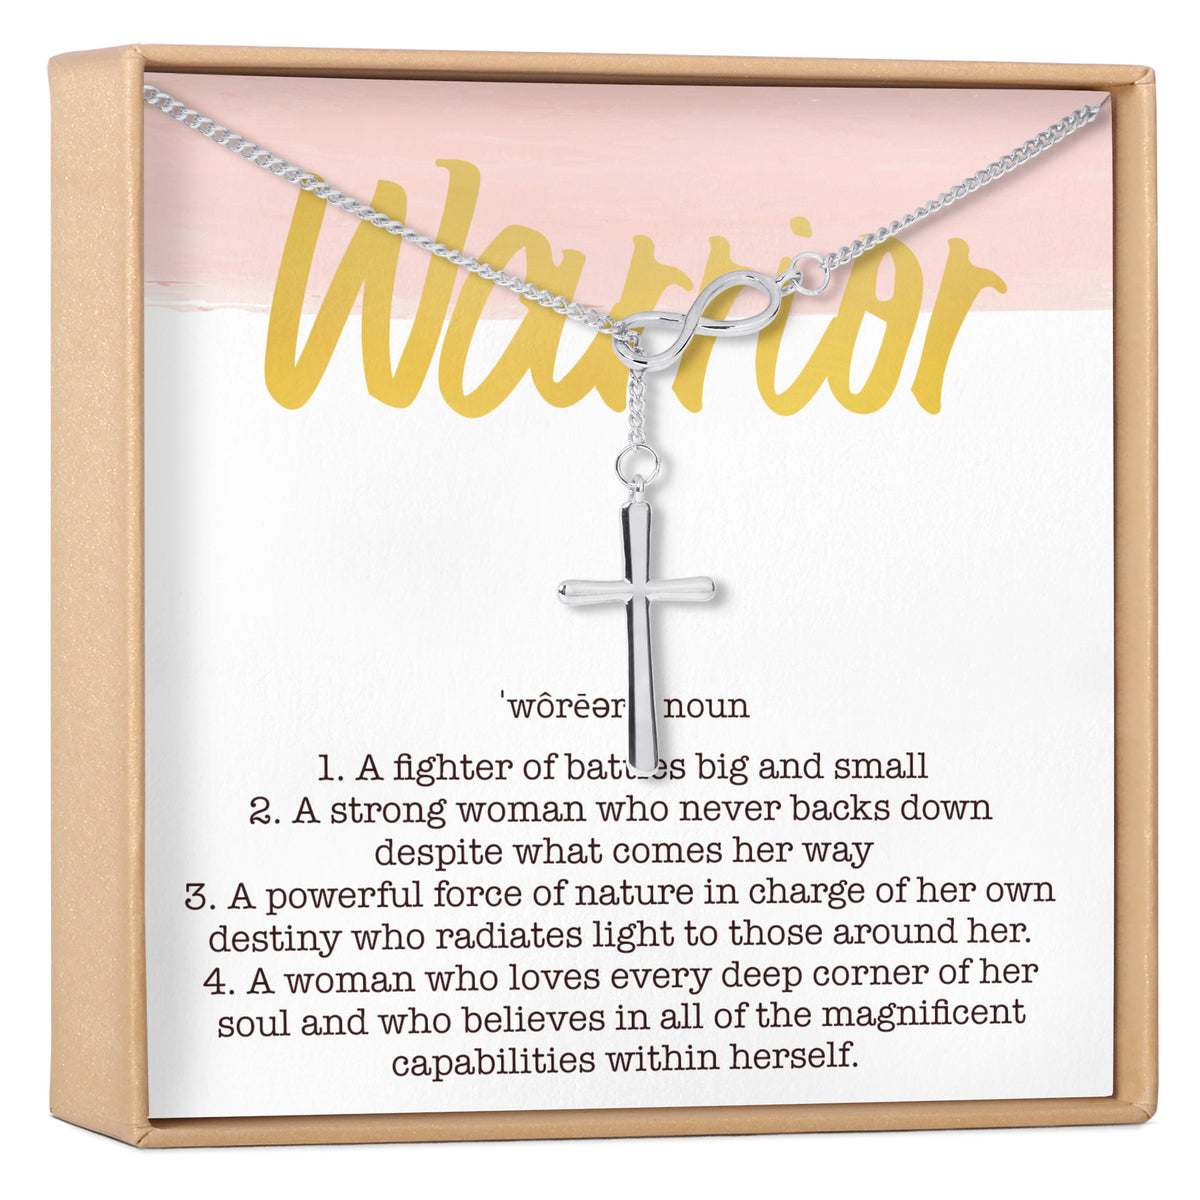 Warrior Necklace, Multiple Styles Necklace